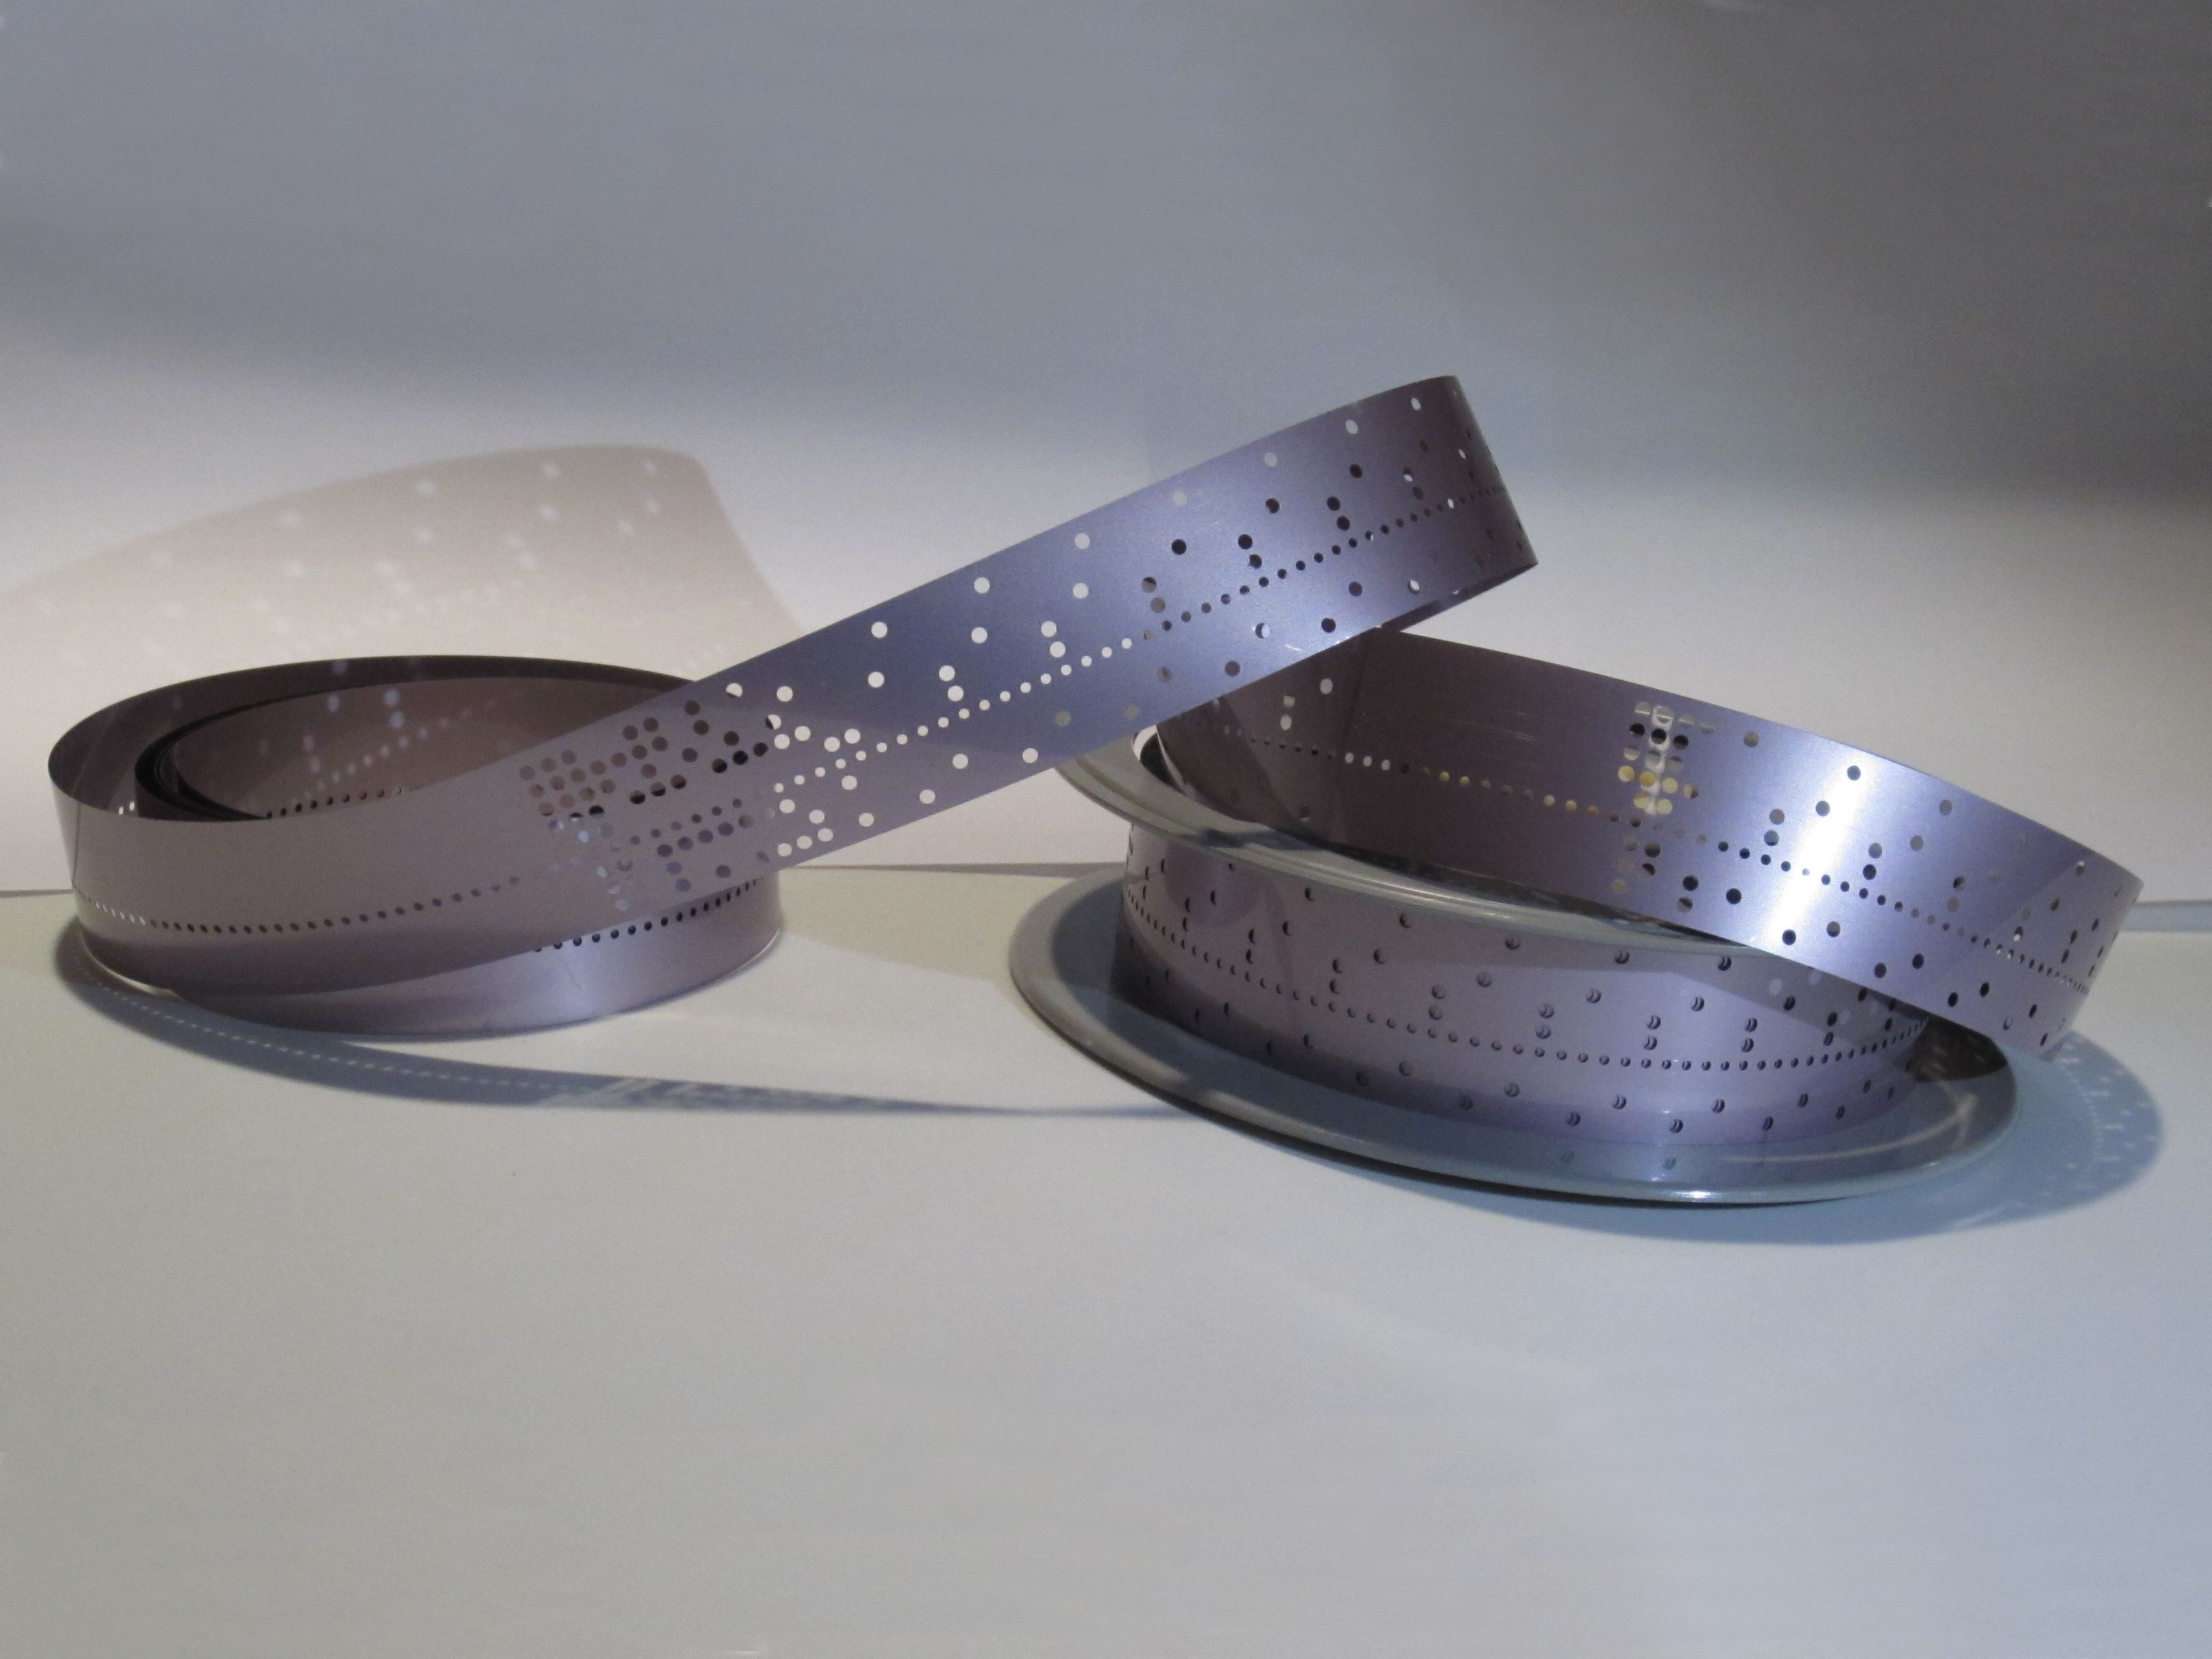 WOD Metalized Polyester Tape, In Stock, Ships Today - Tape Providers